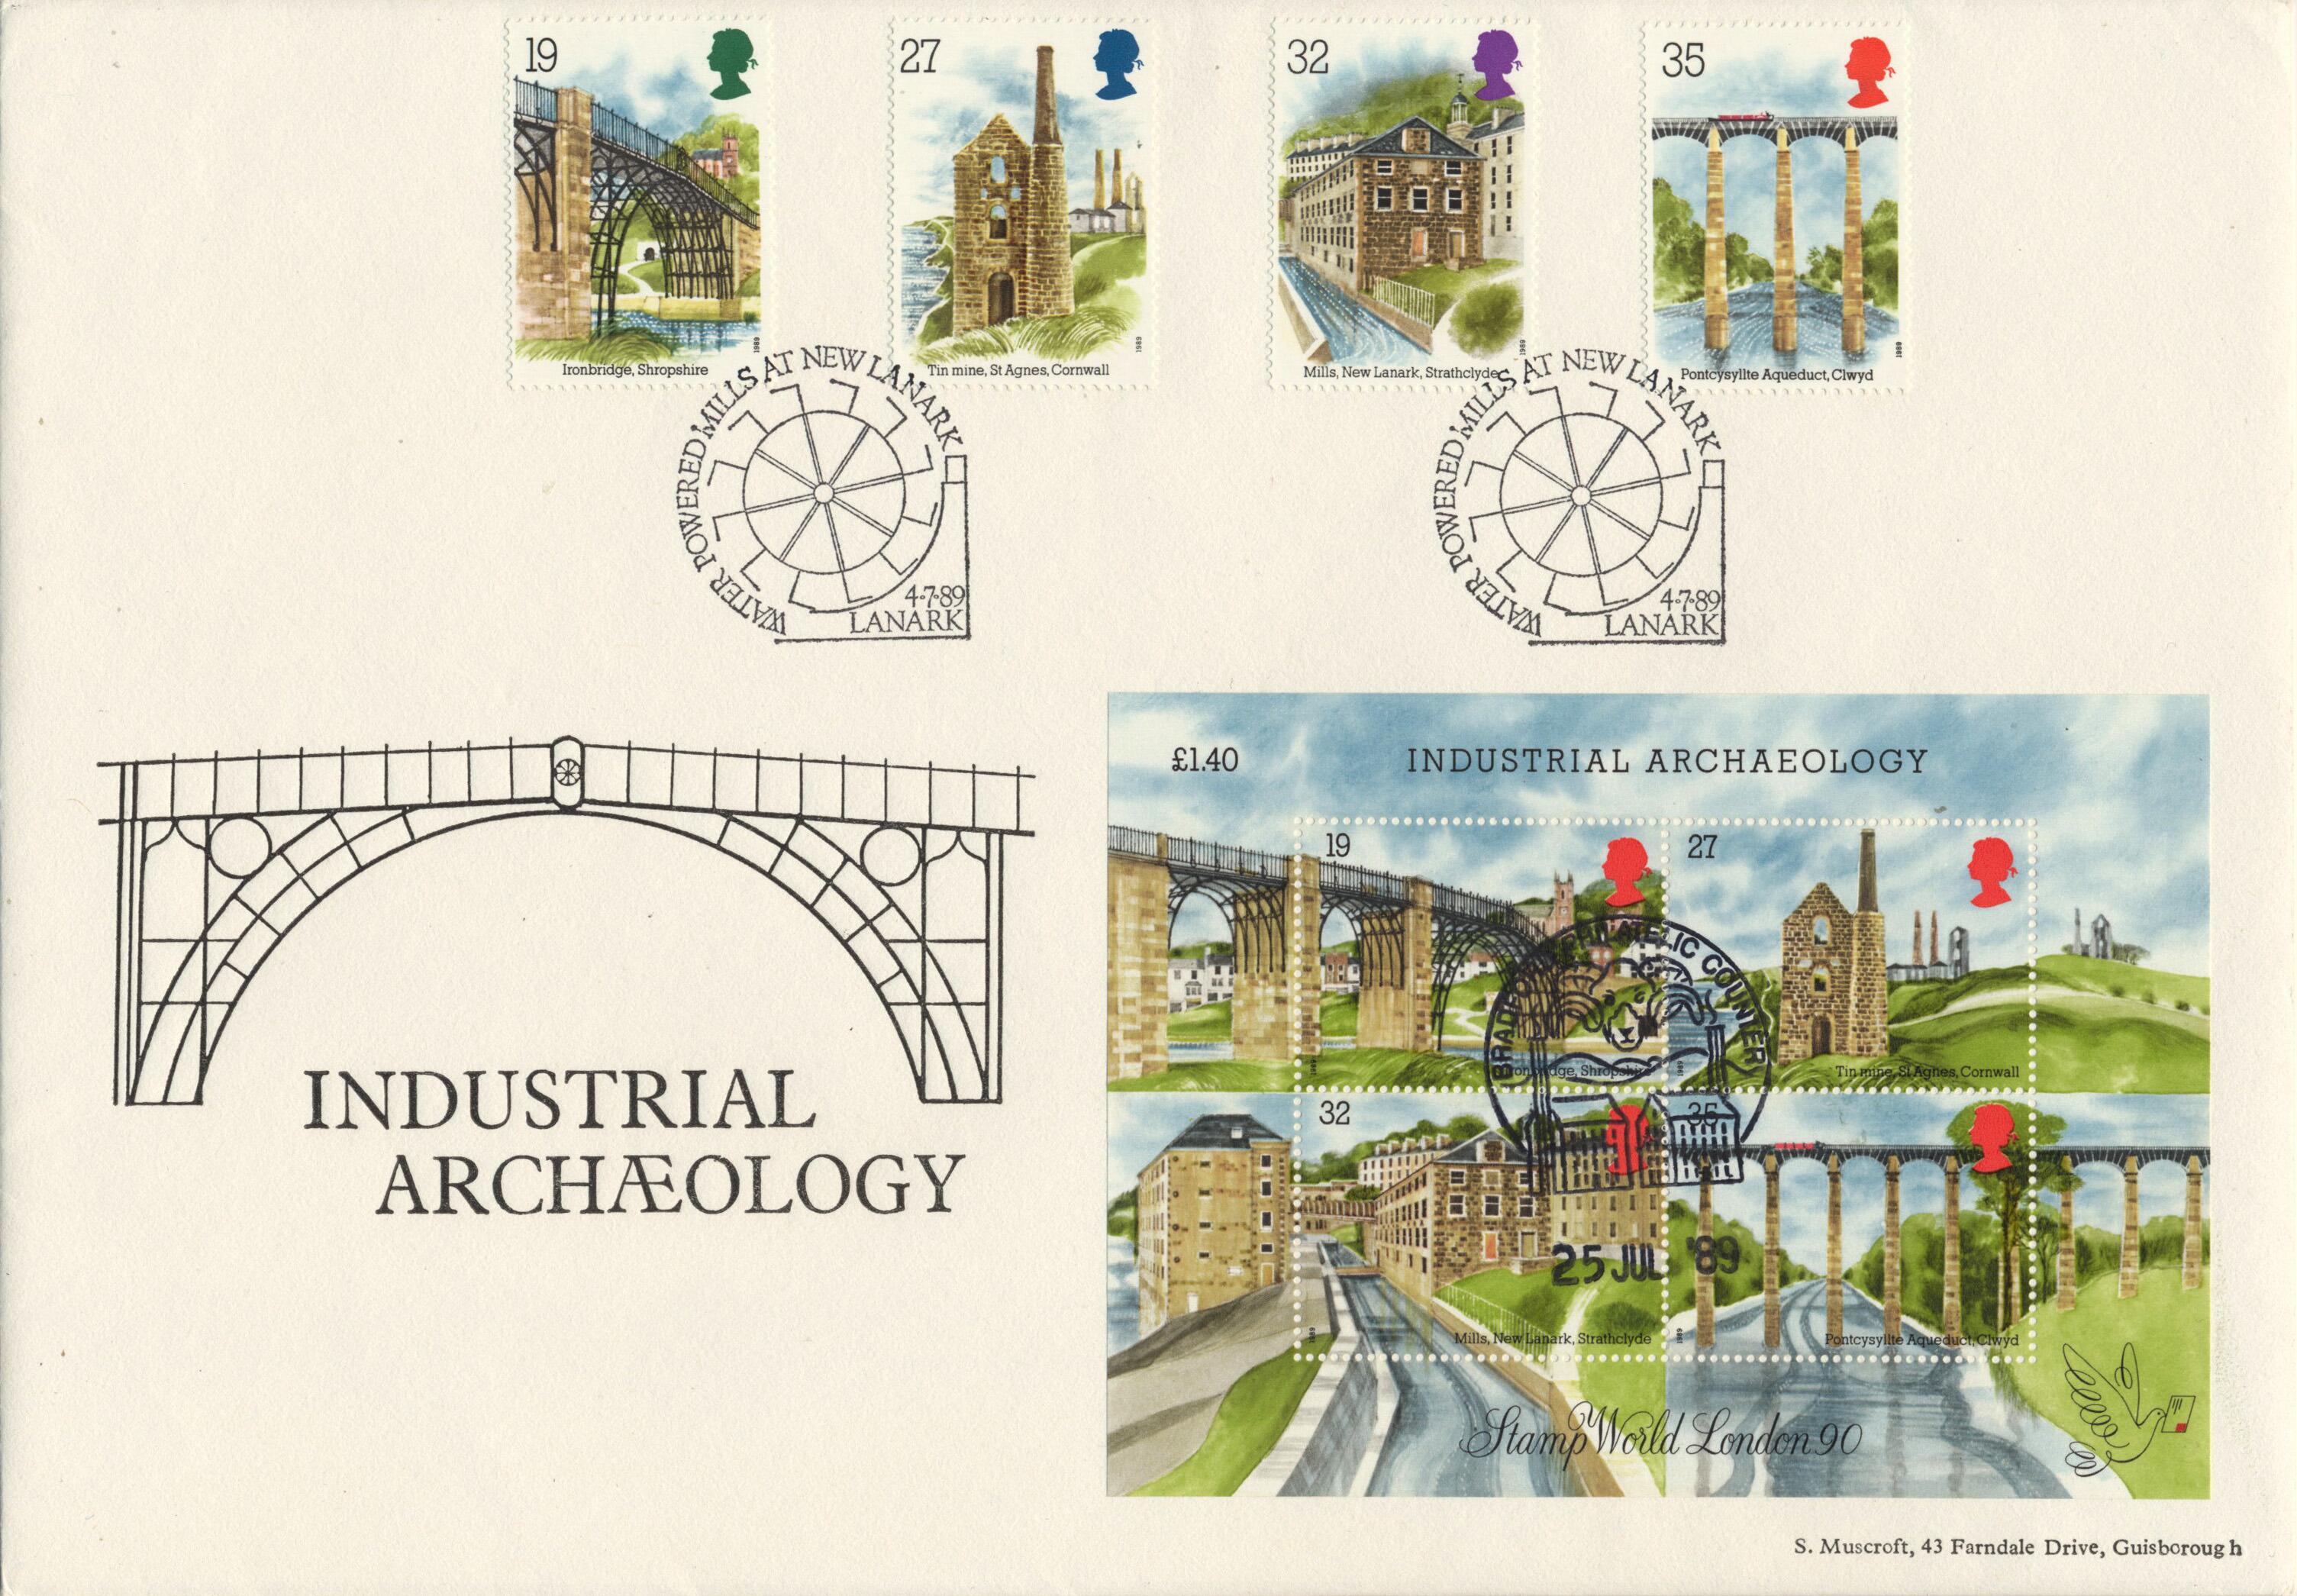 1989 Industrial Archaeology, double postmarked cover